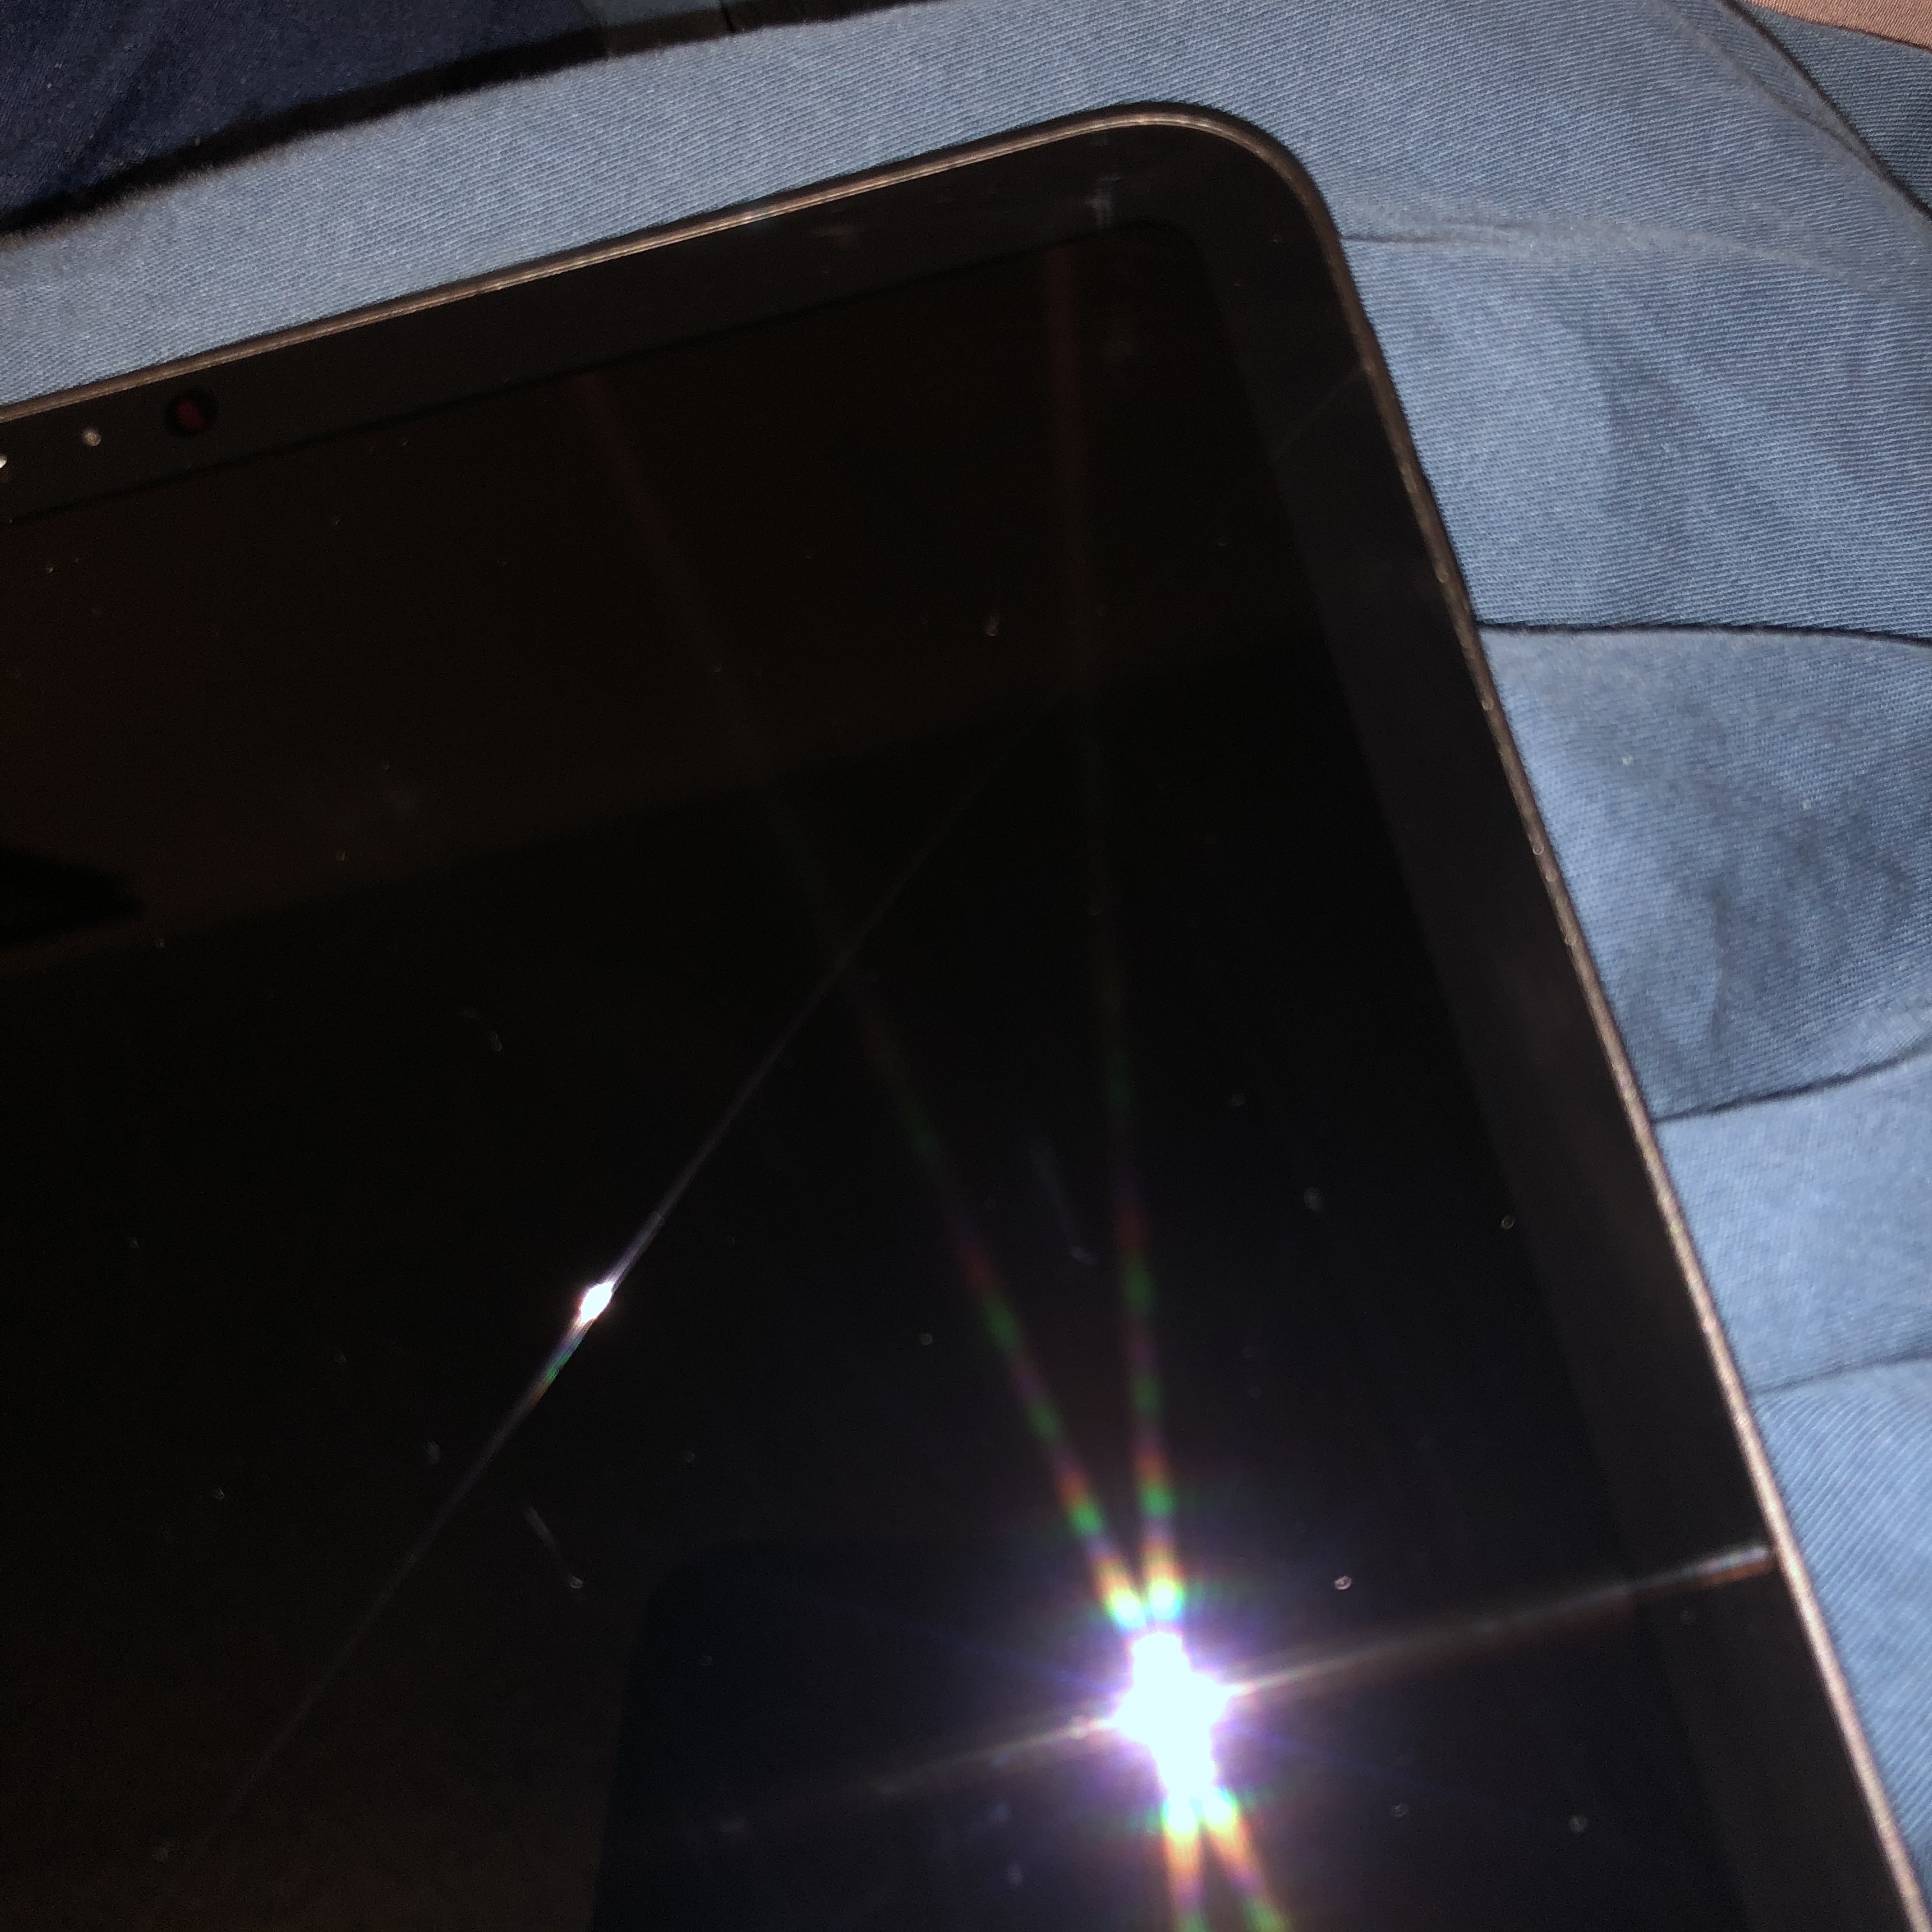 11 iPad Pro (Gen 2) screen cracked. What would you do